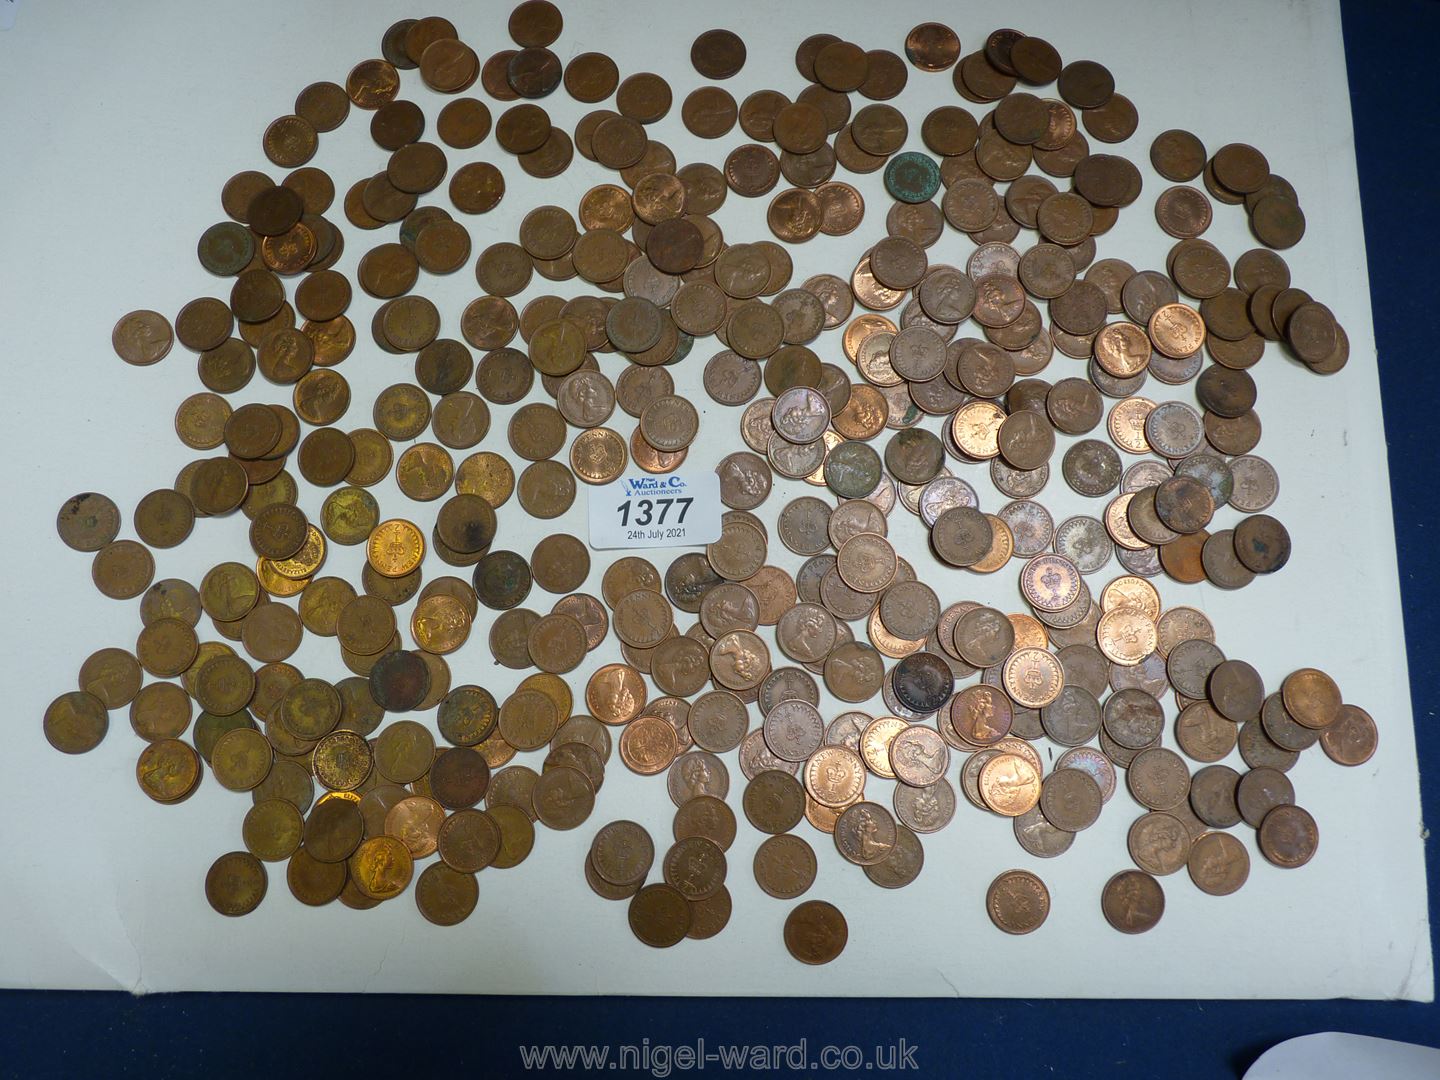 A quantity of discontinued decimal half pence coins, totalling approx. £1.91 1/2p.